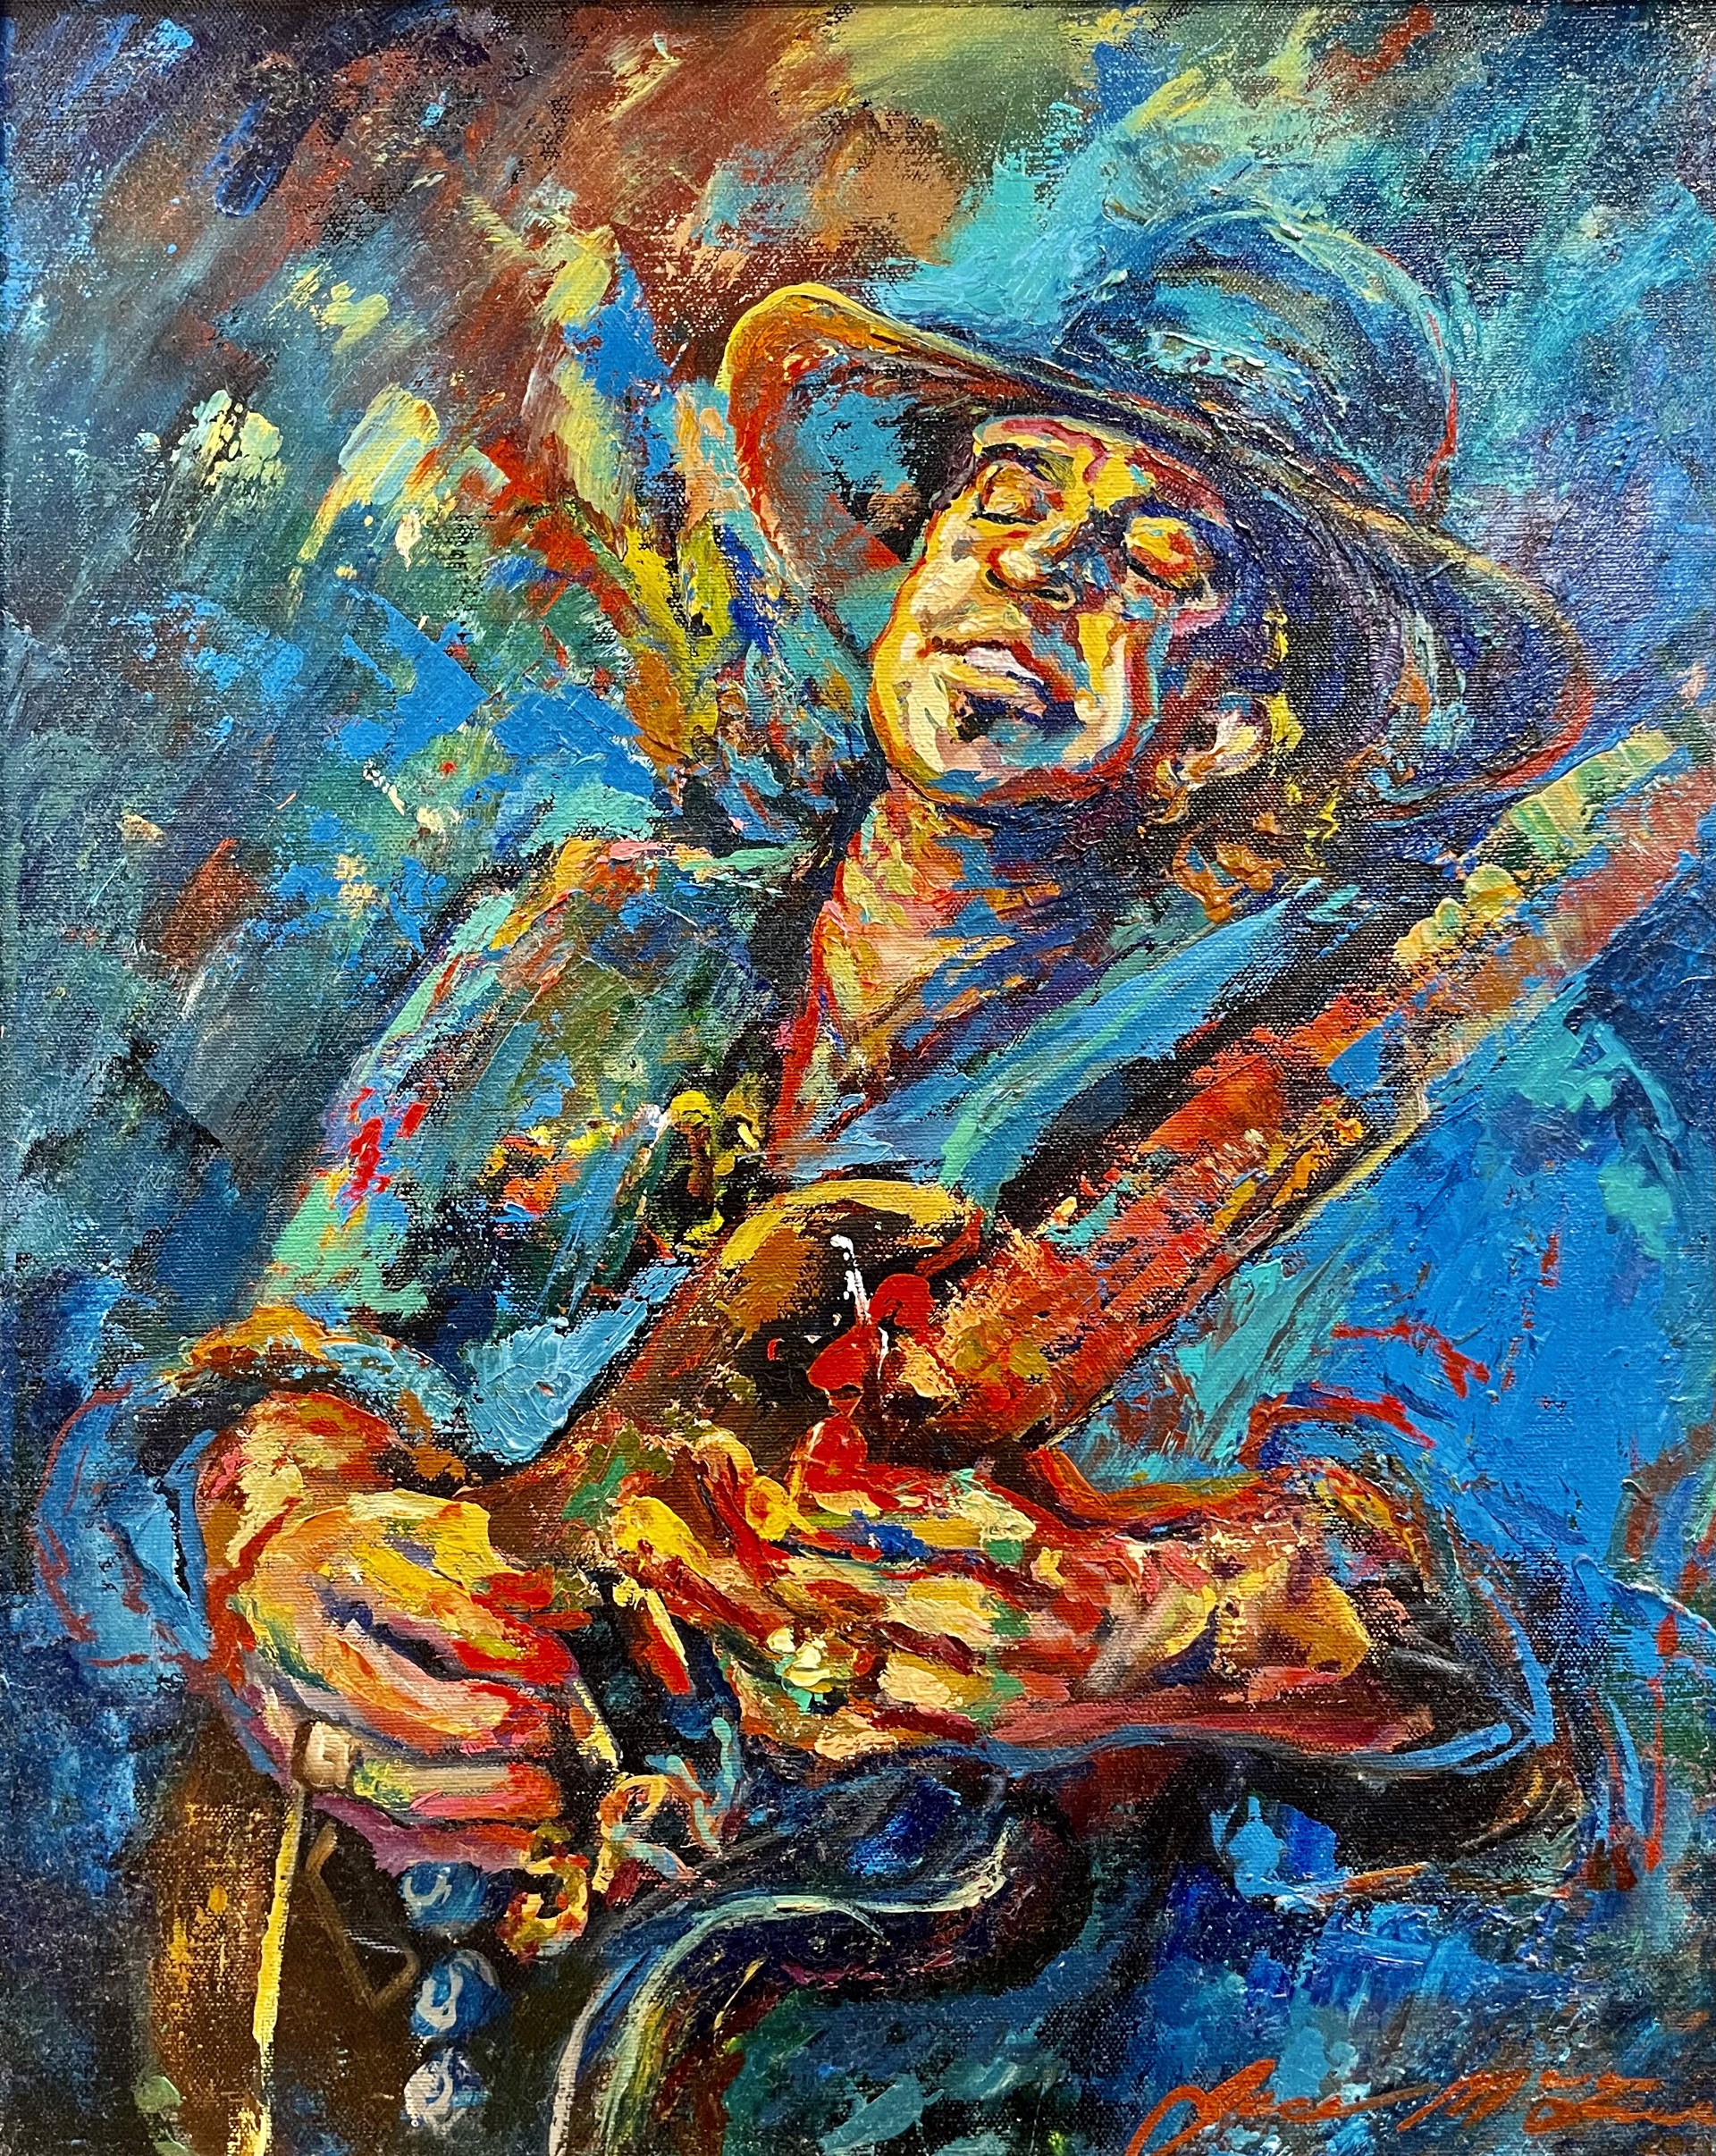 SRV #1” (Stevie Ray Vaughan) by Jace McTier